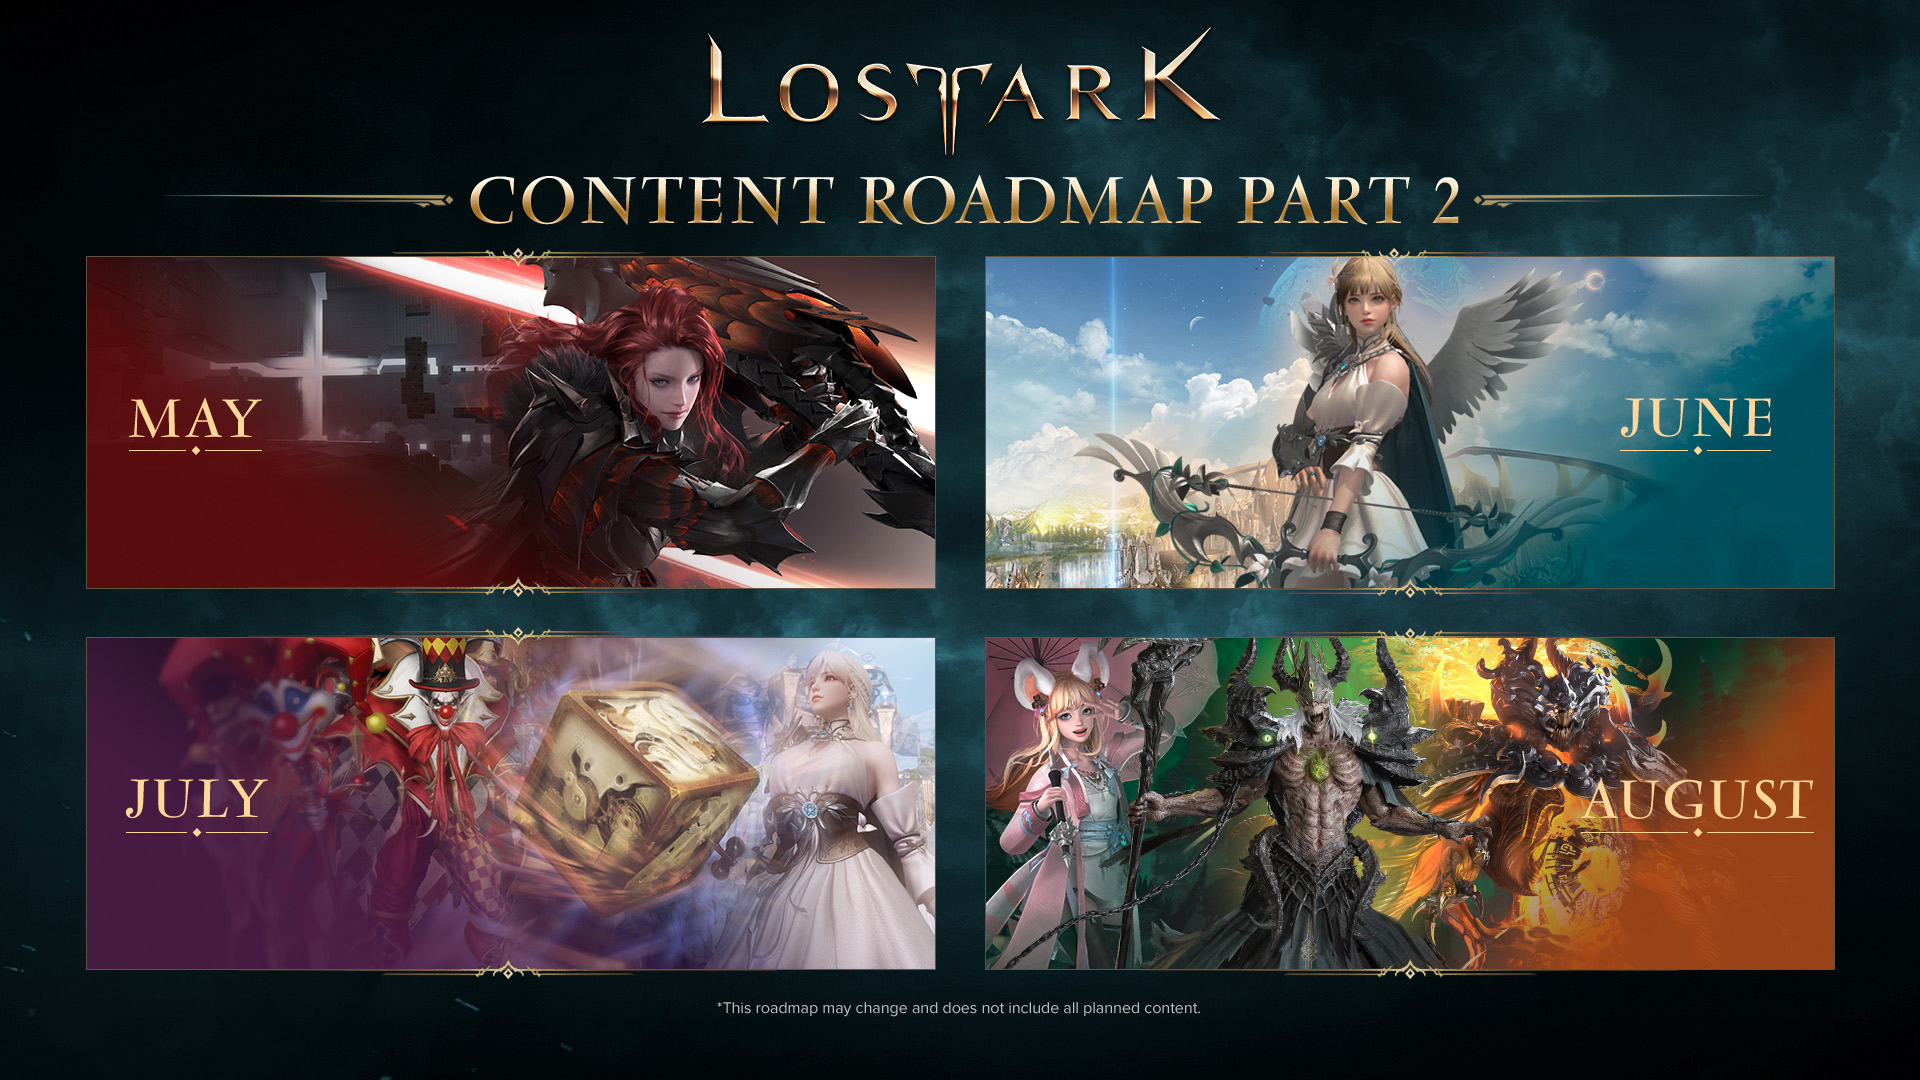 2023 Roadmap - Part 2 - News  Lost Ark - Free to Play MMO Action RPG